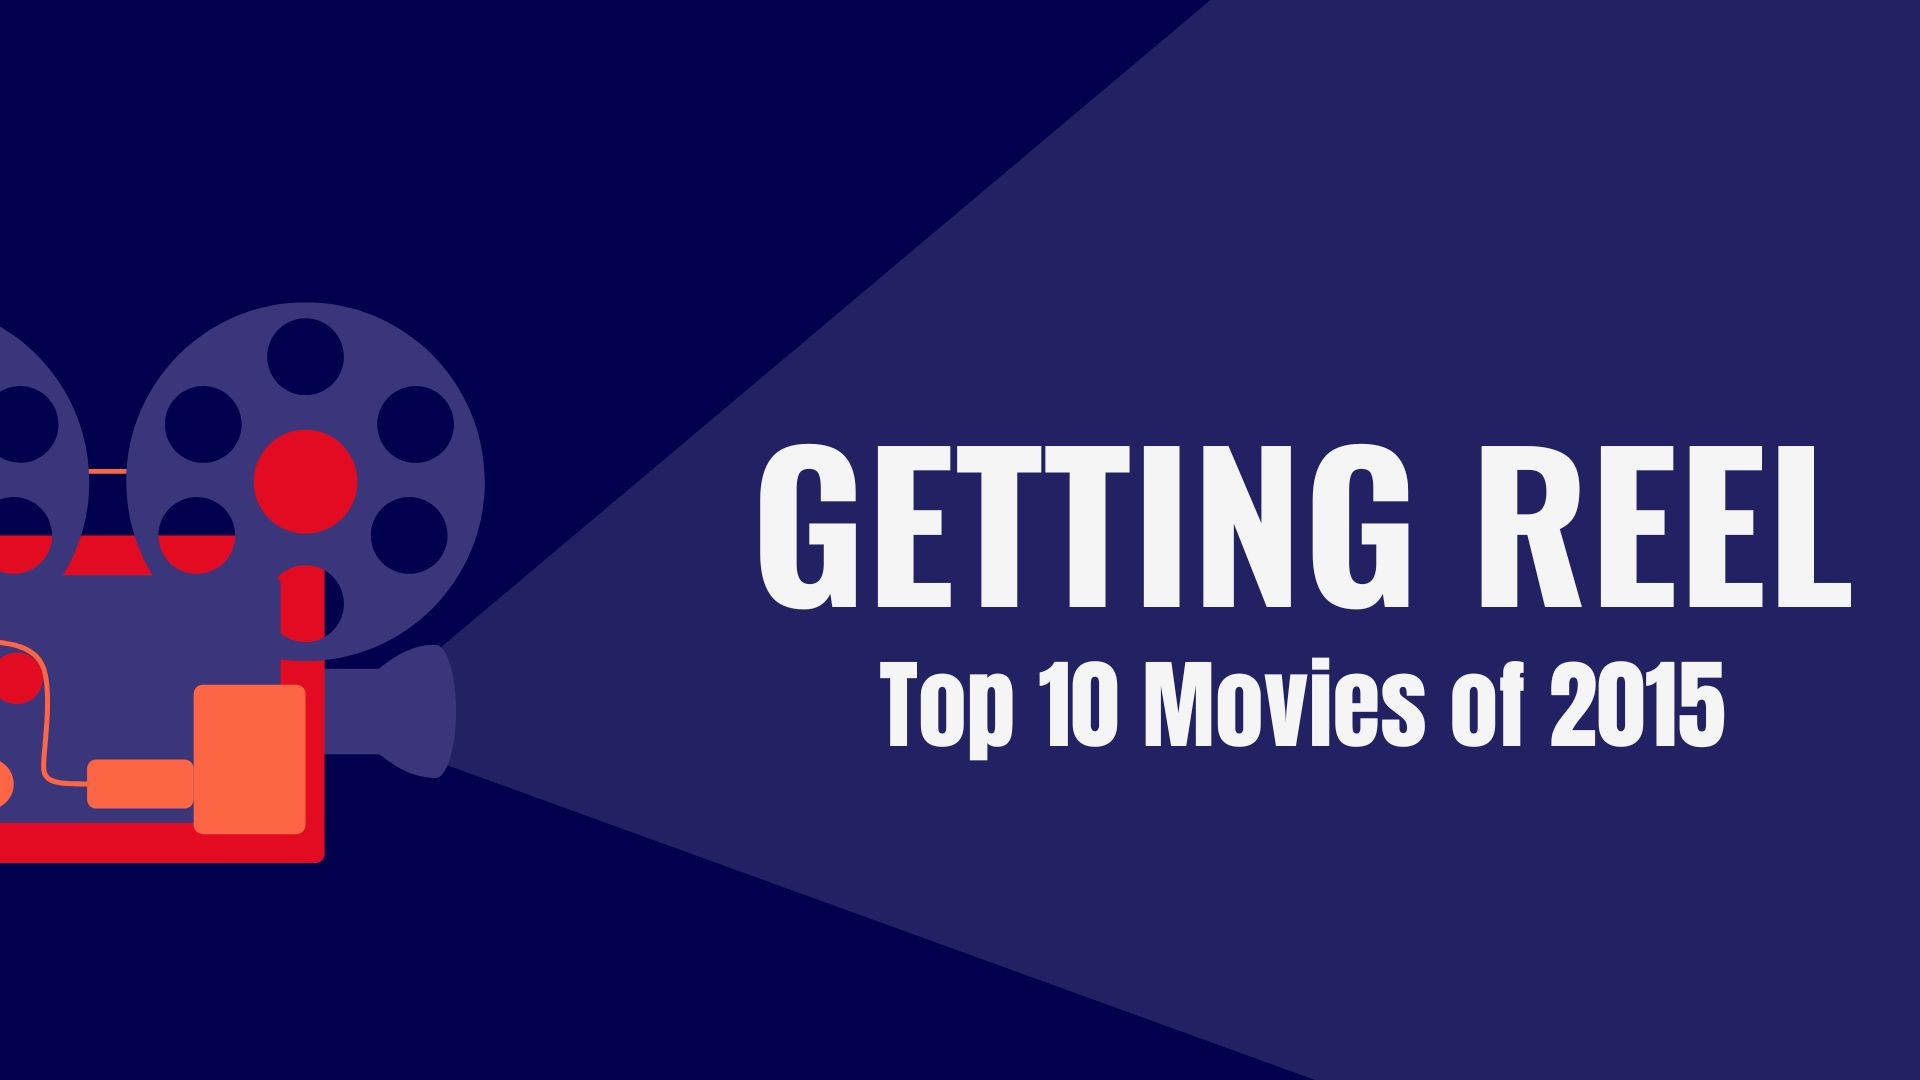 KTHV movie reviewers discuss their top 10 movies of 2015. Favorites like 'The Martian' didn't make the cut, but see the emotional movies that did.